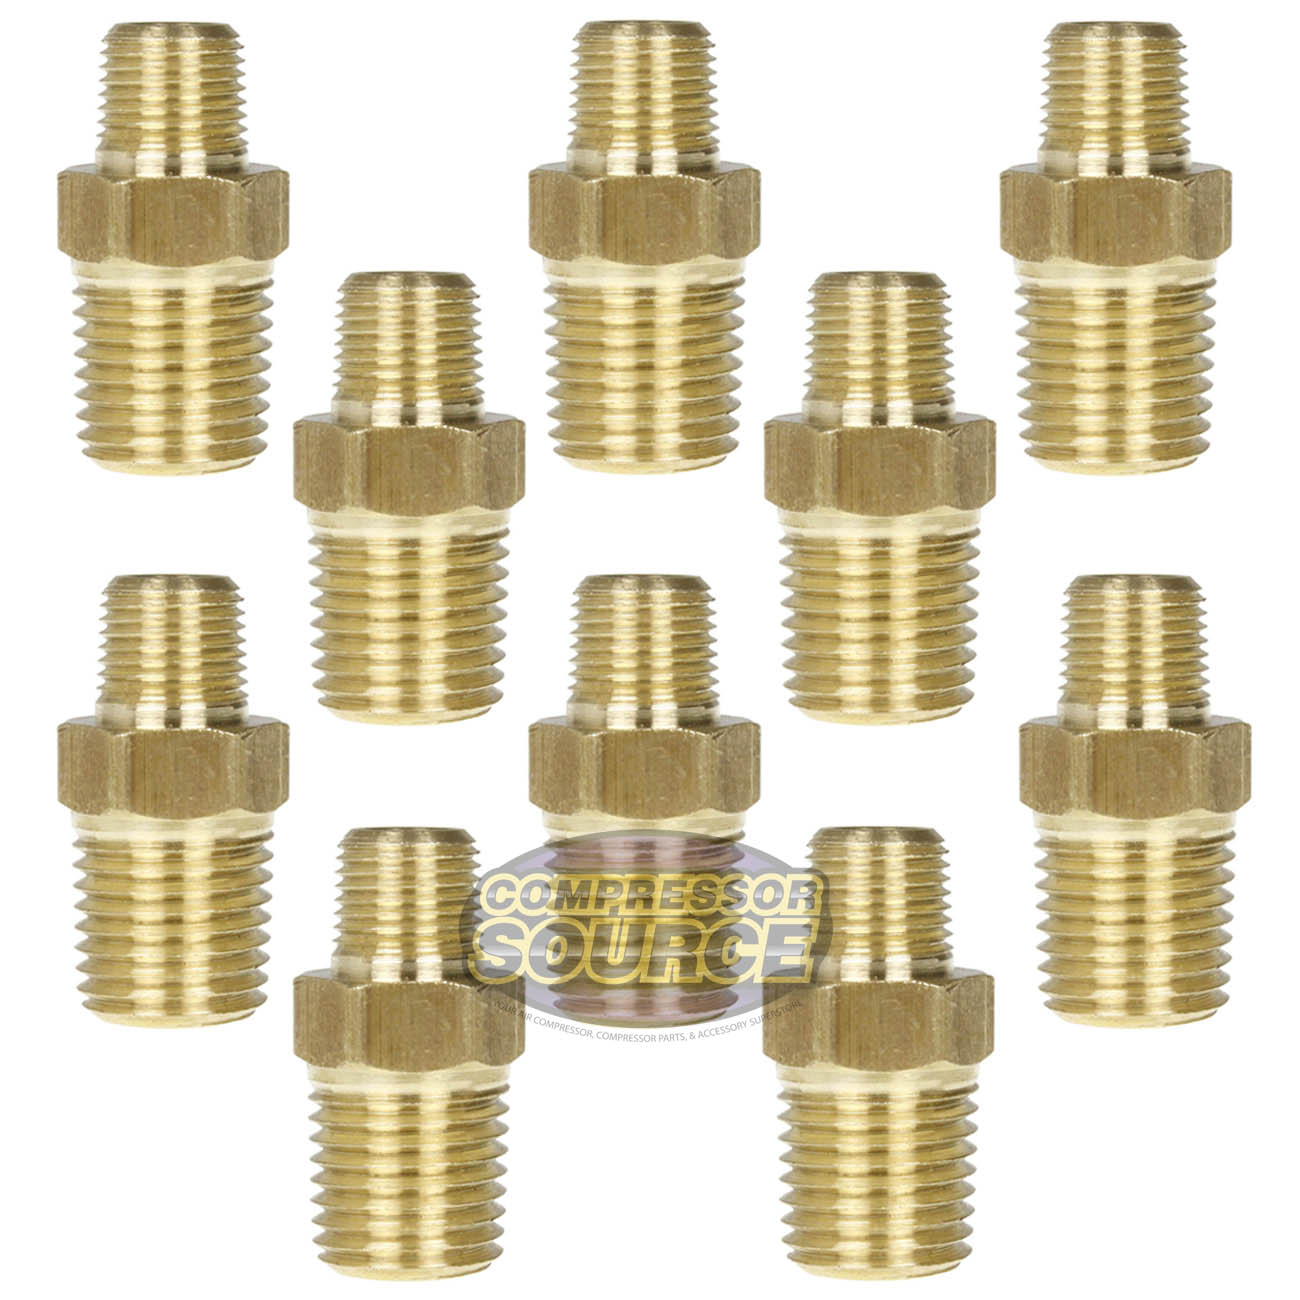 10 Pack 1/4" x 1/8" Male NPTF Pipe Reducing Hex Nipple Solid Brass Pipe Fitting